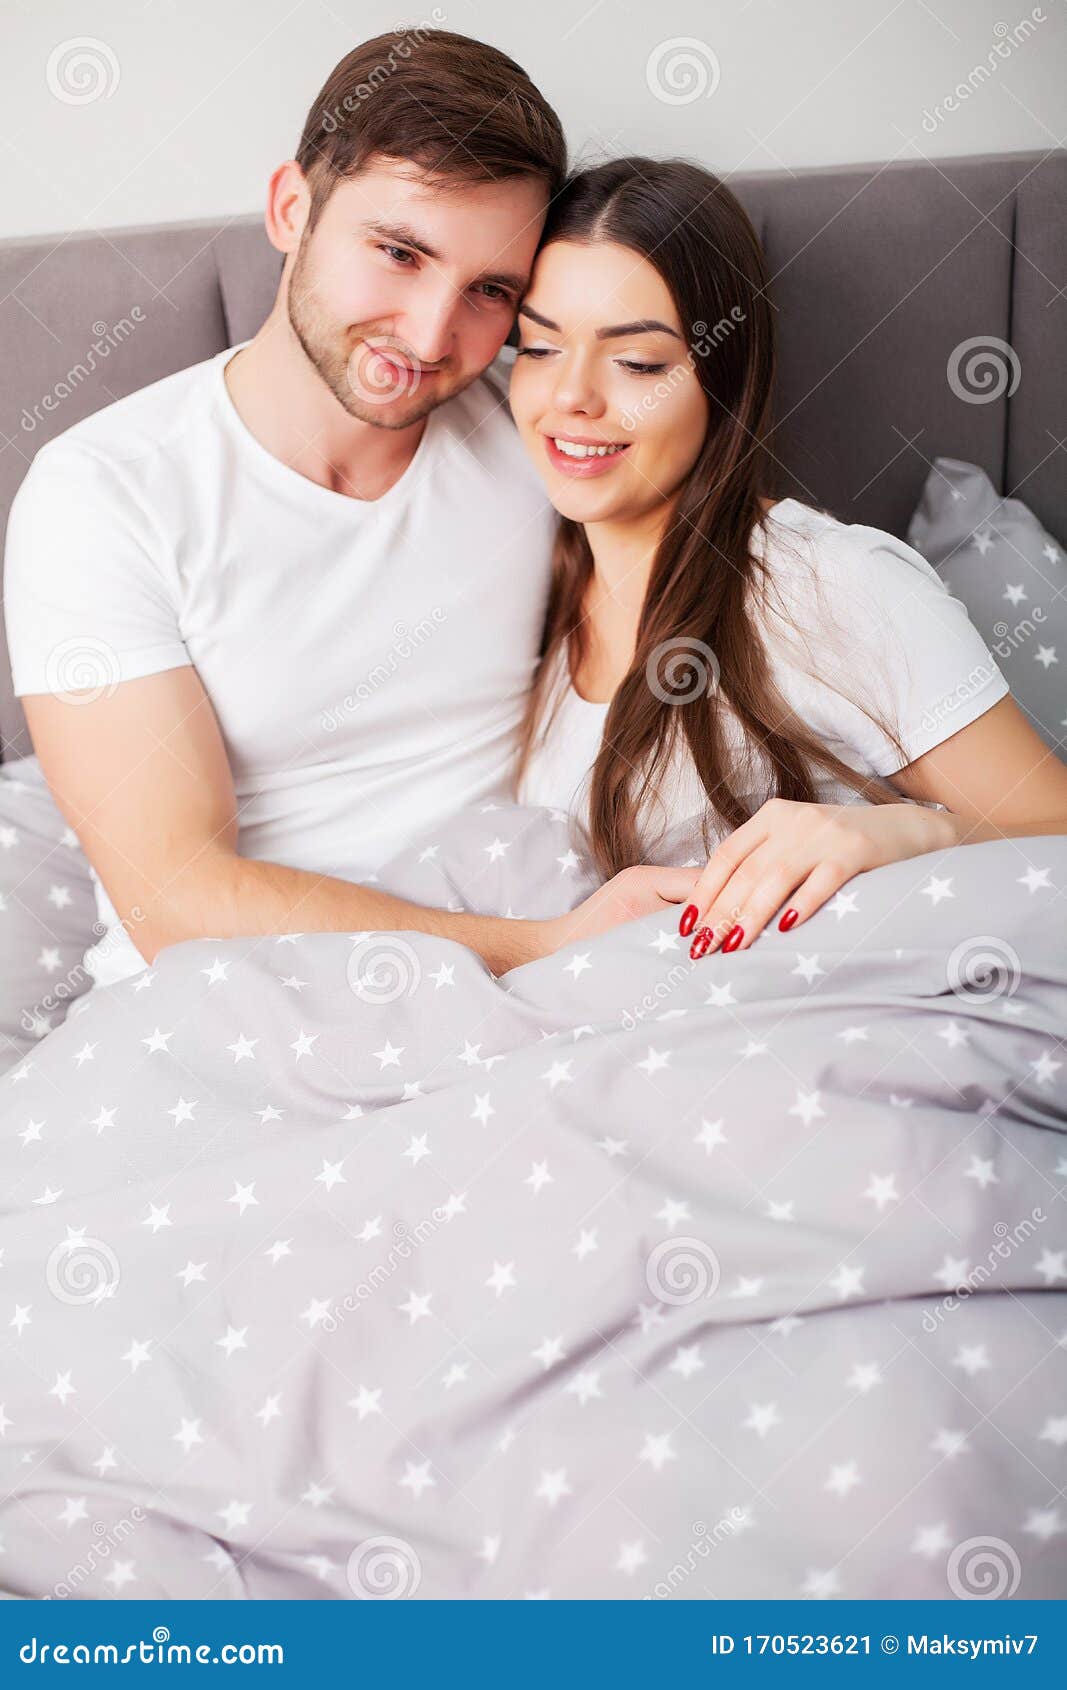 Happy Couple Having Fun In Bed Intimate Sensual Young Couple In Bedroom Enjoying Each Other